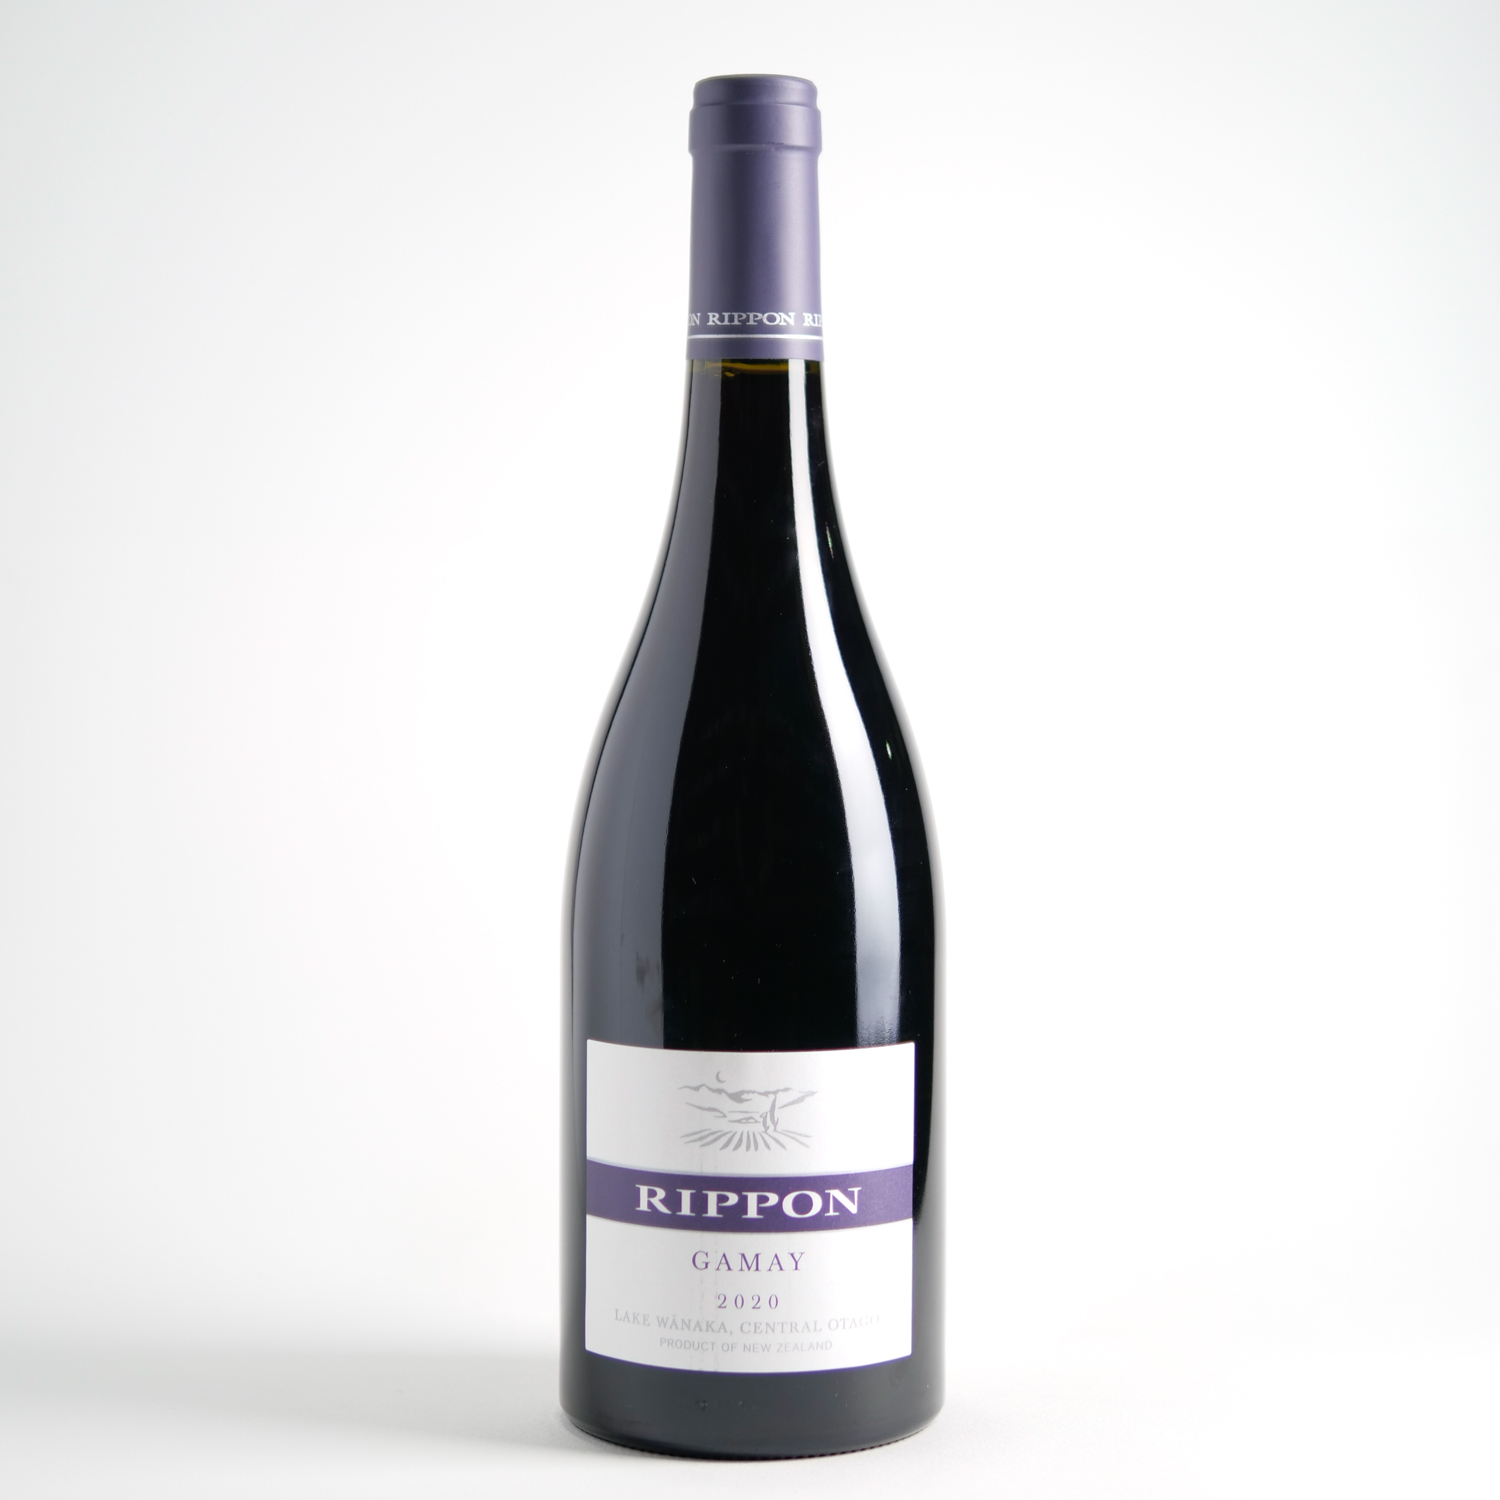 Rippon Gamay 2020